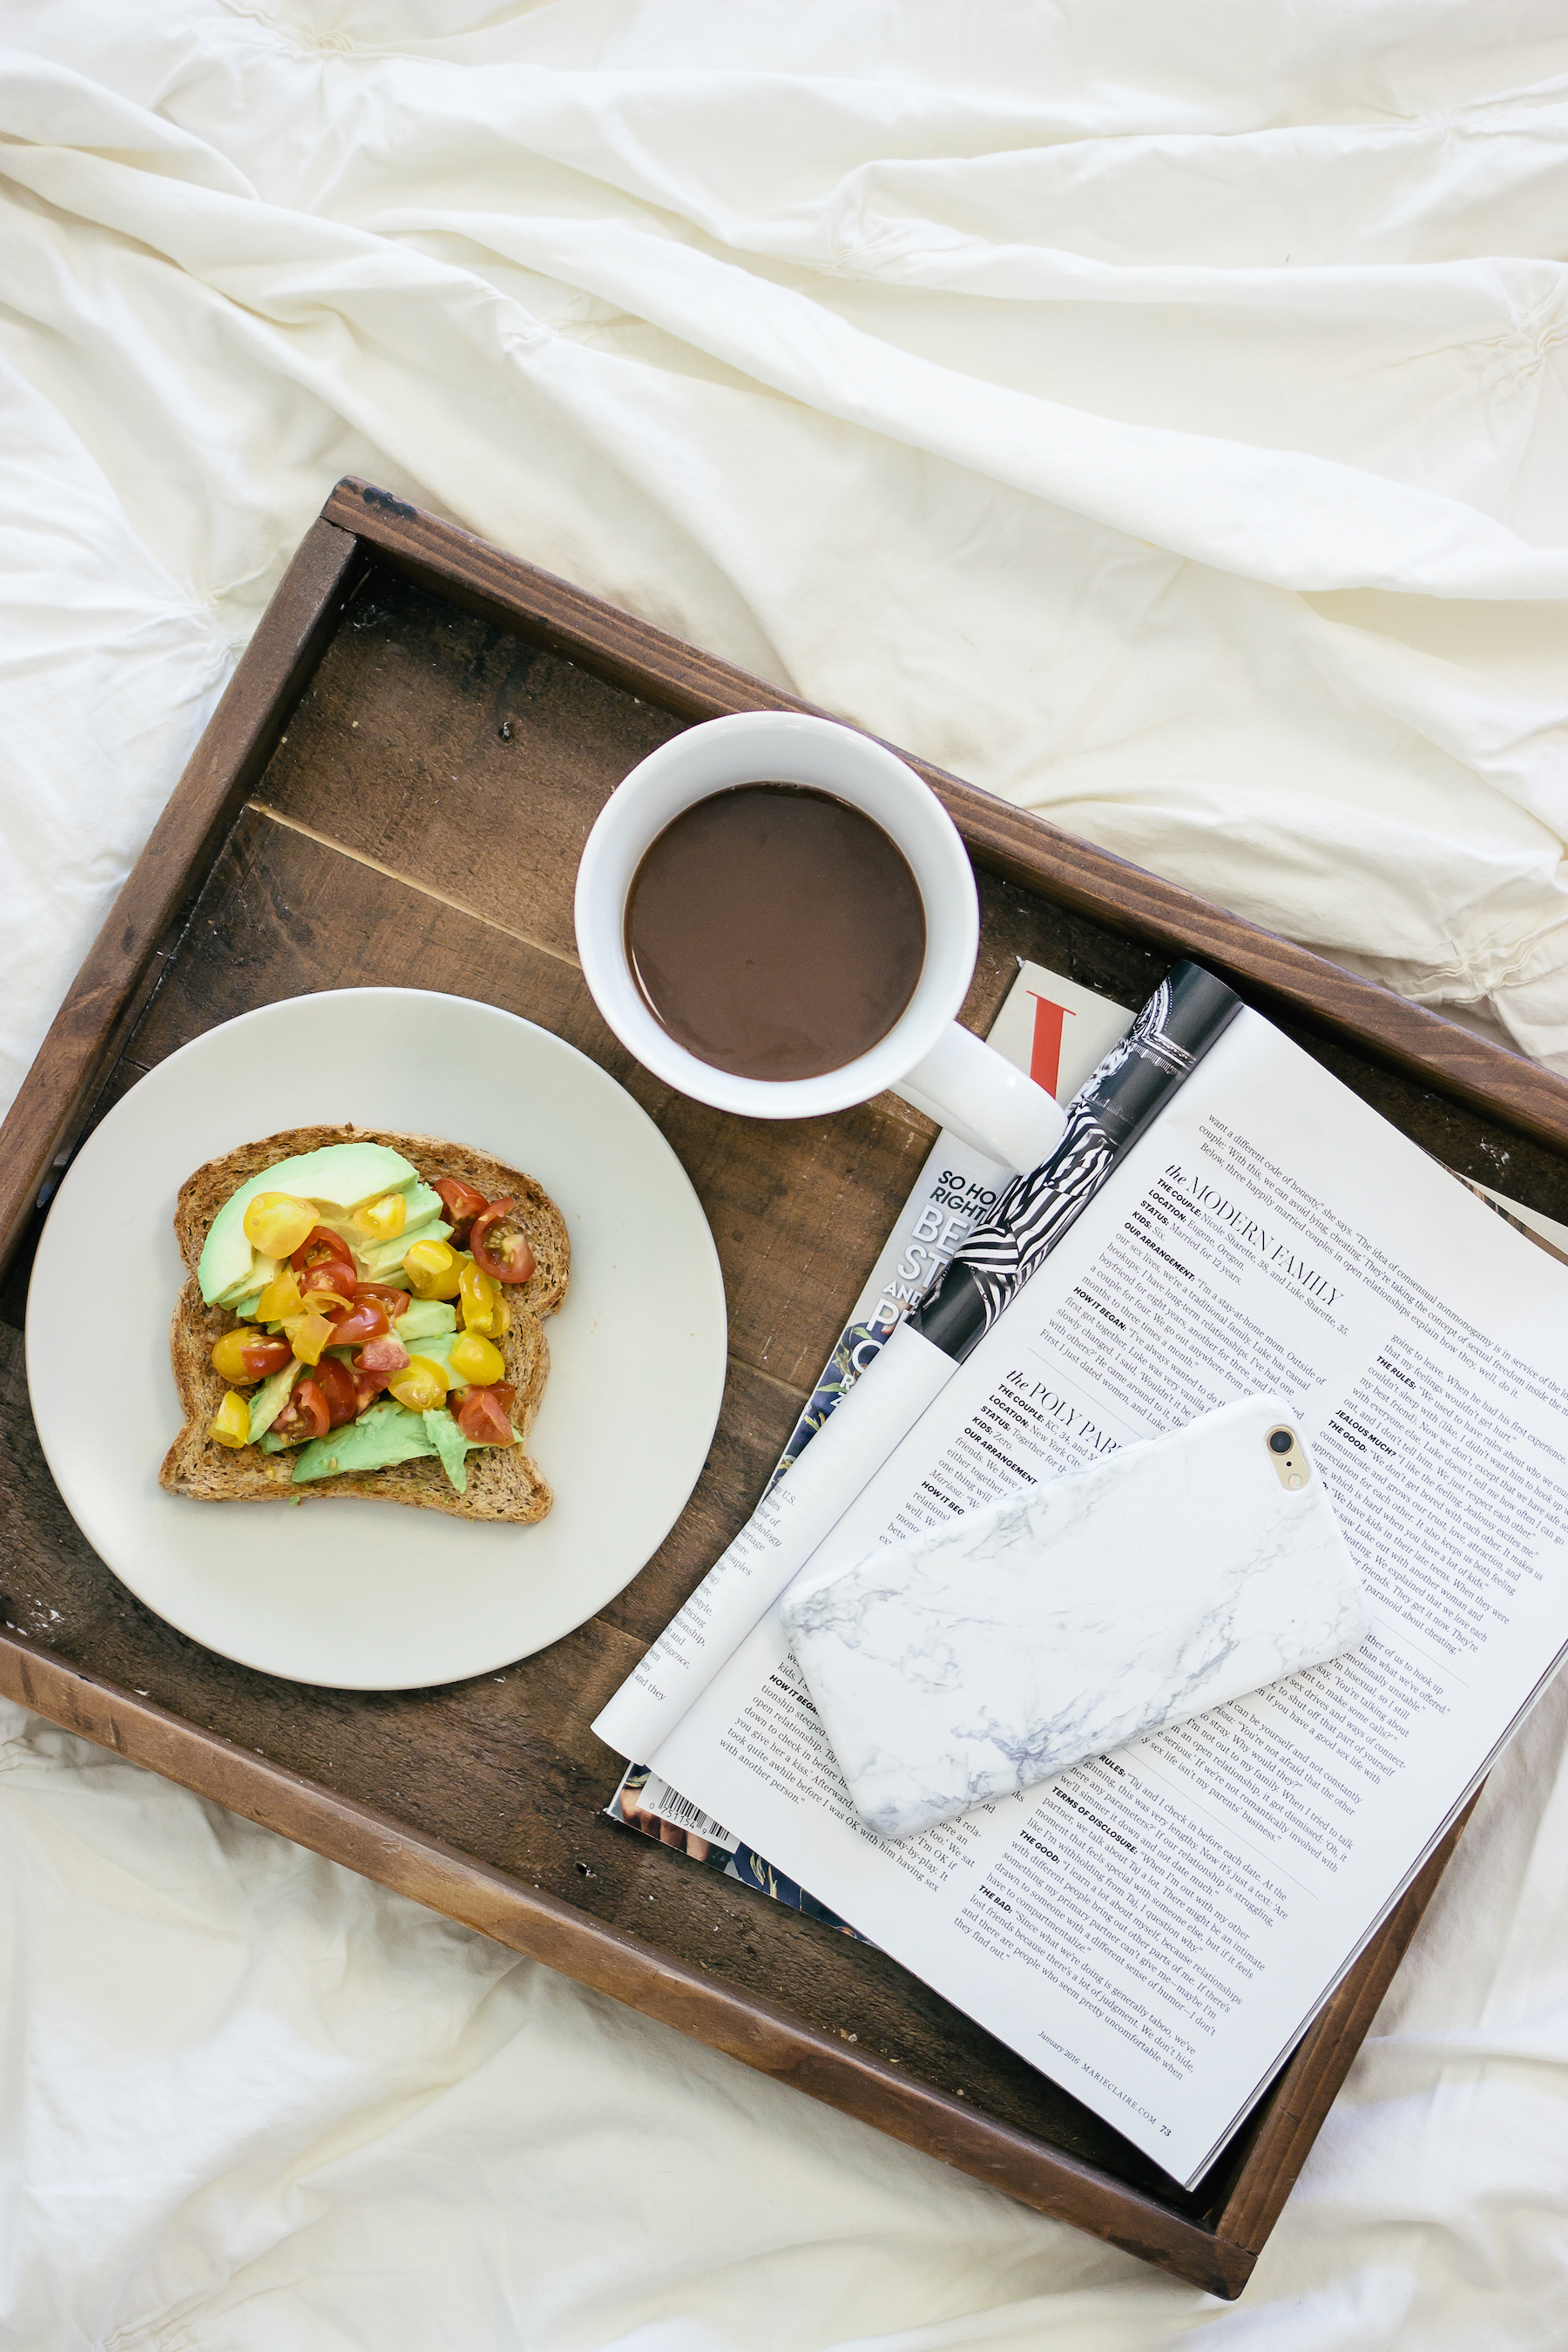 Does Eating Breakfast Actually Make You Hungrier?